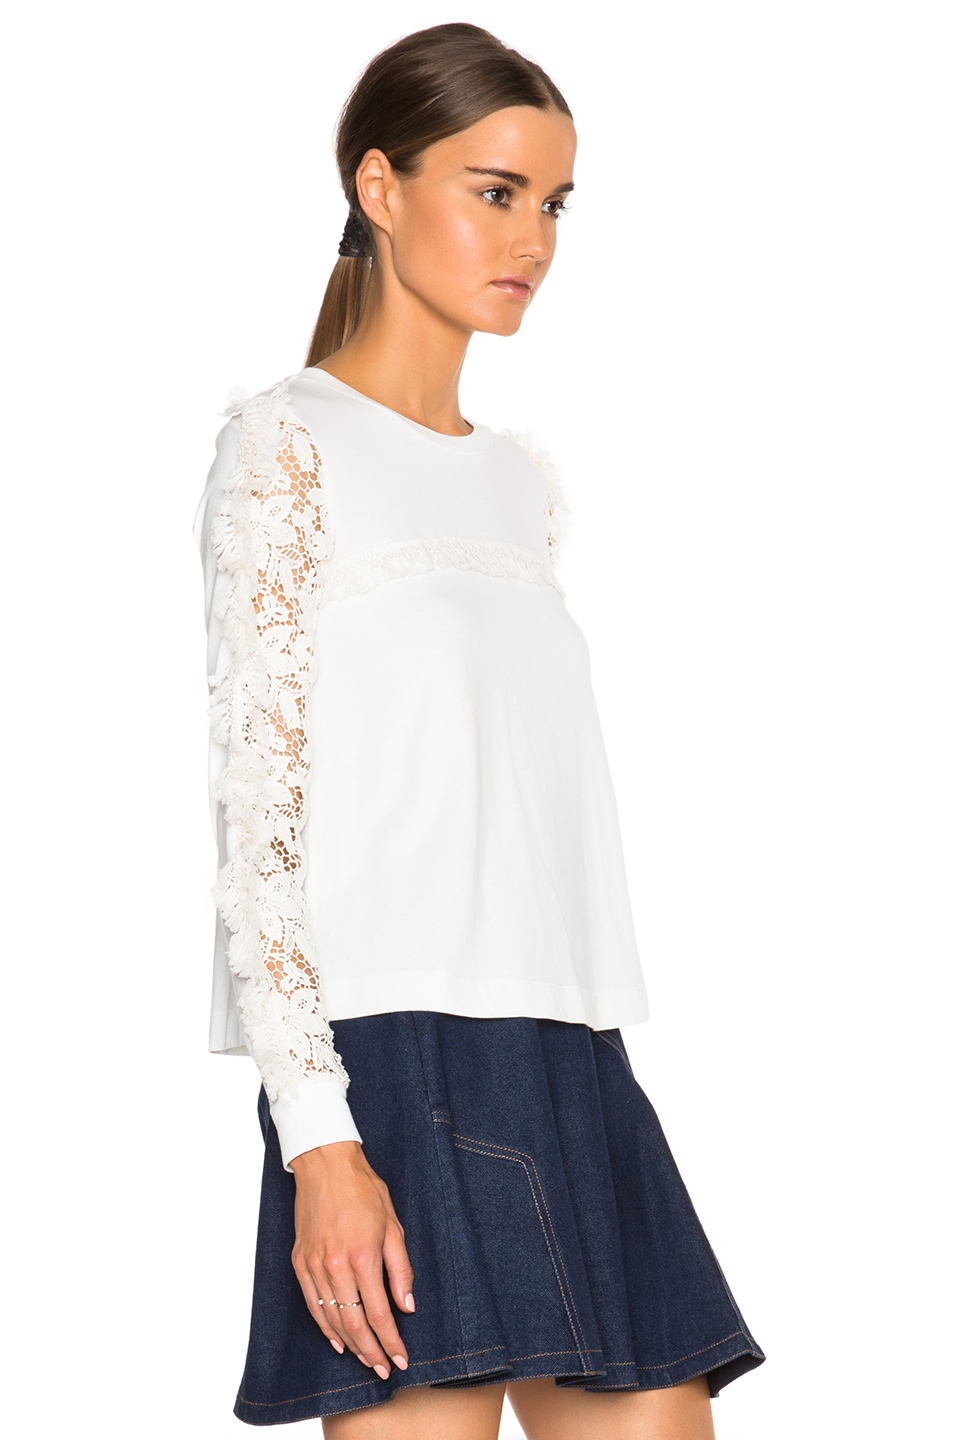 Lyst - See By Chloé Lace Sleeve Top in White